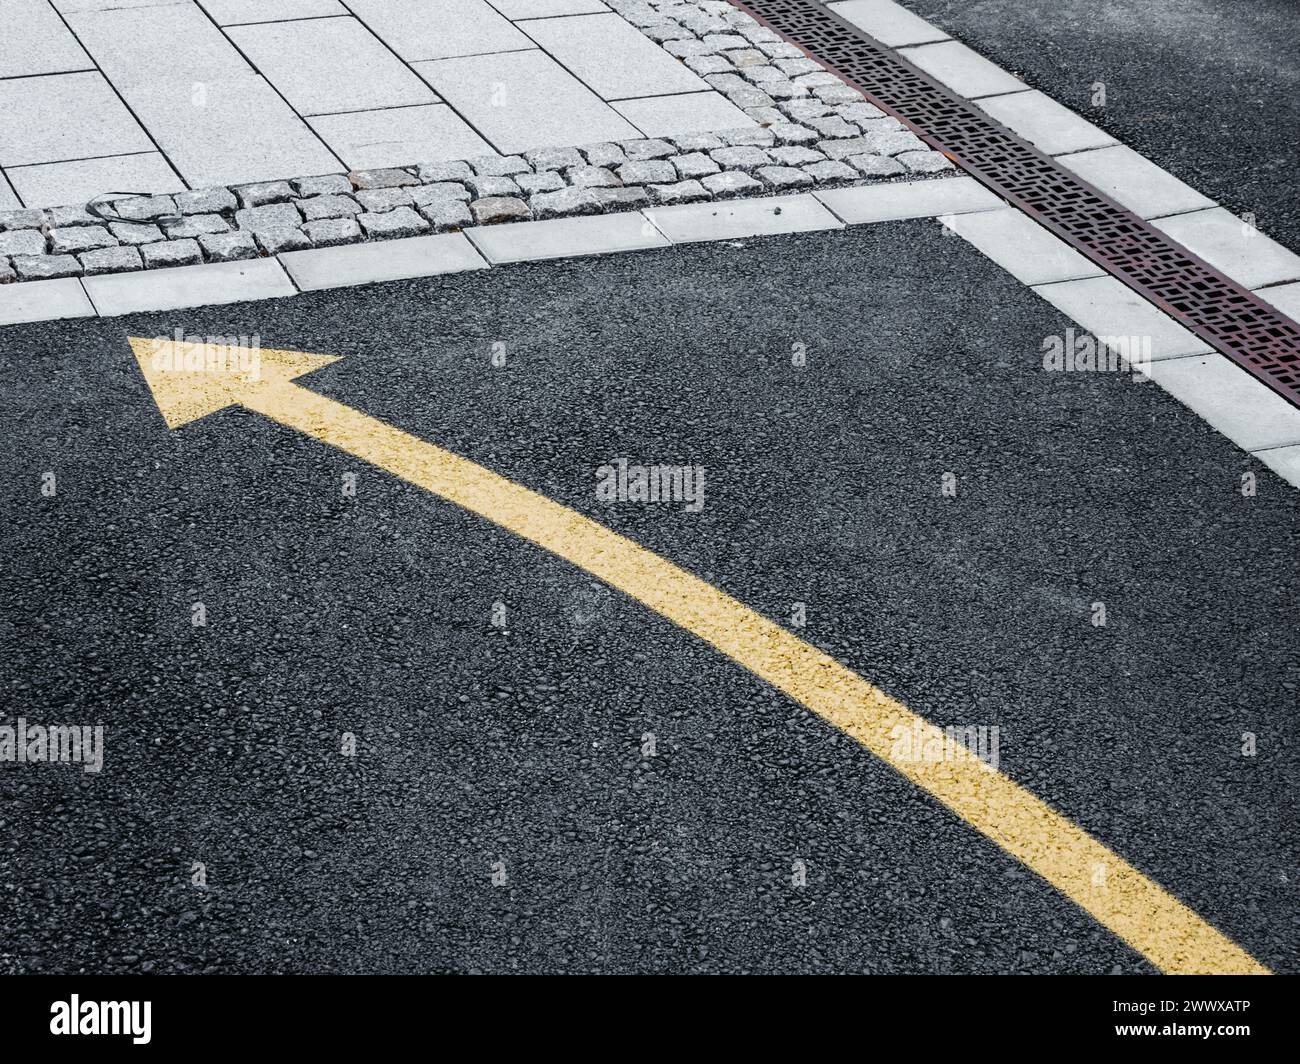 A freshly painted yellow arrow points right on the dark asphalt of a Swedish street, indicating the direction of traffic flow or guiding pedestrians. Stock Photo